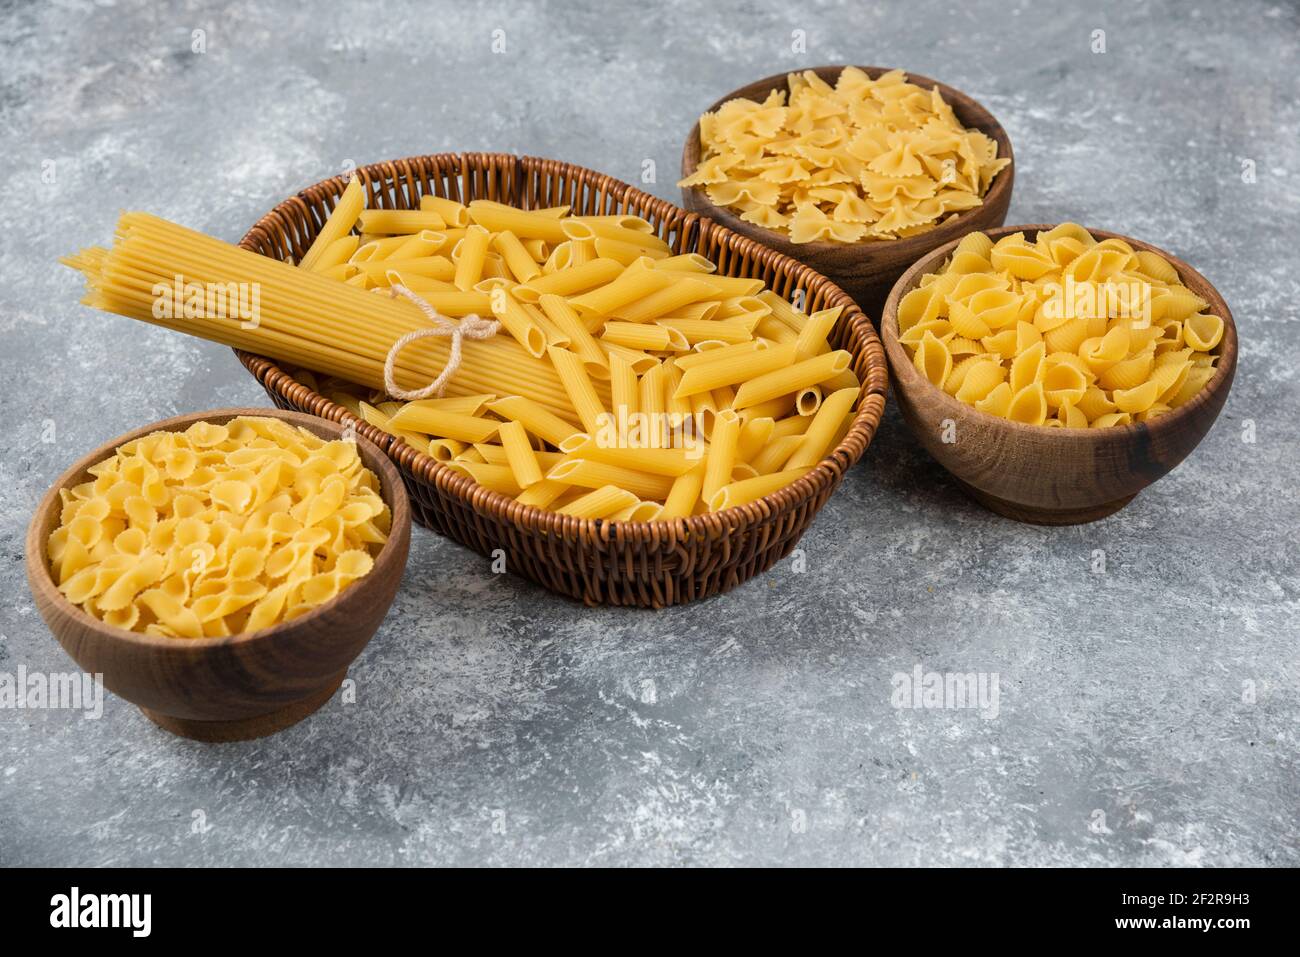 Pile of various uncooked dry pasta in wicker basket and wooden bowls Stock Photo